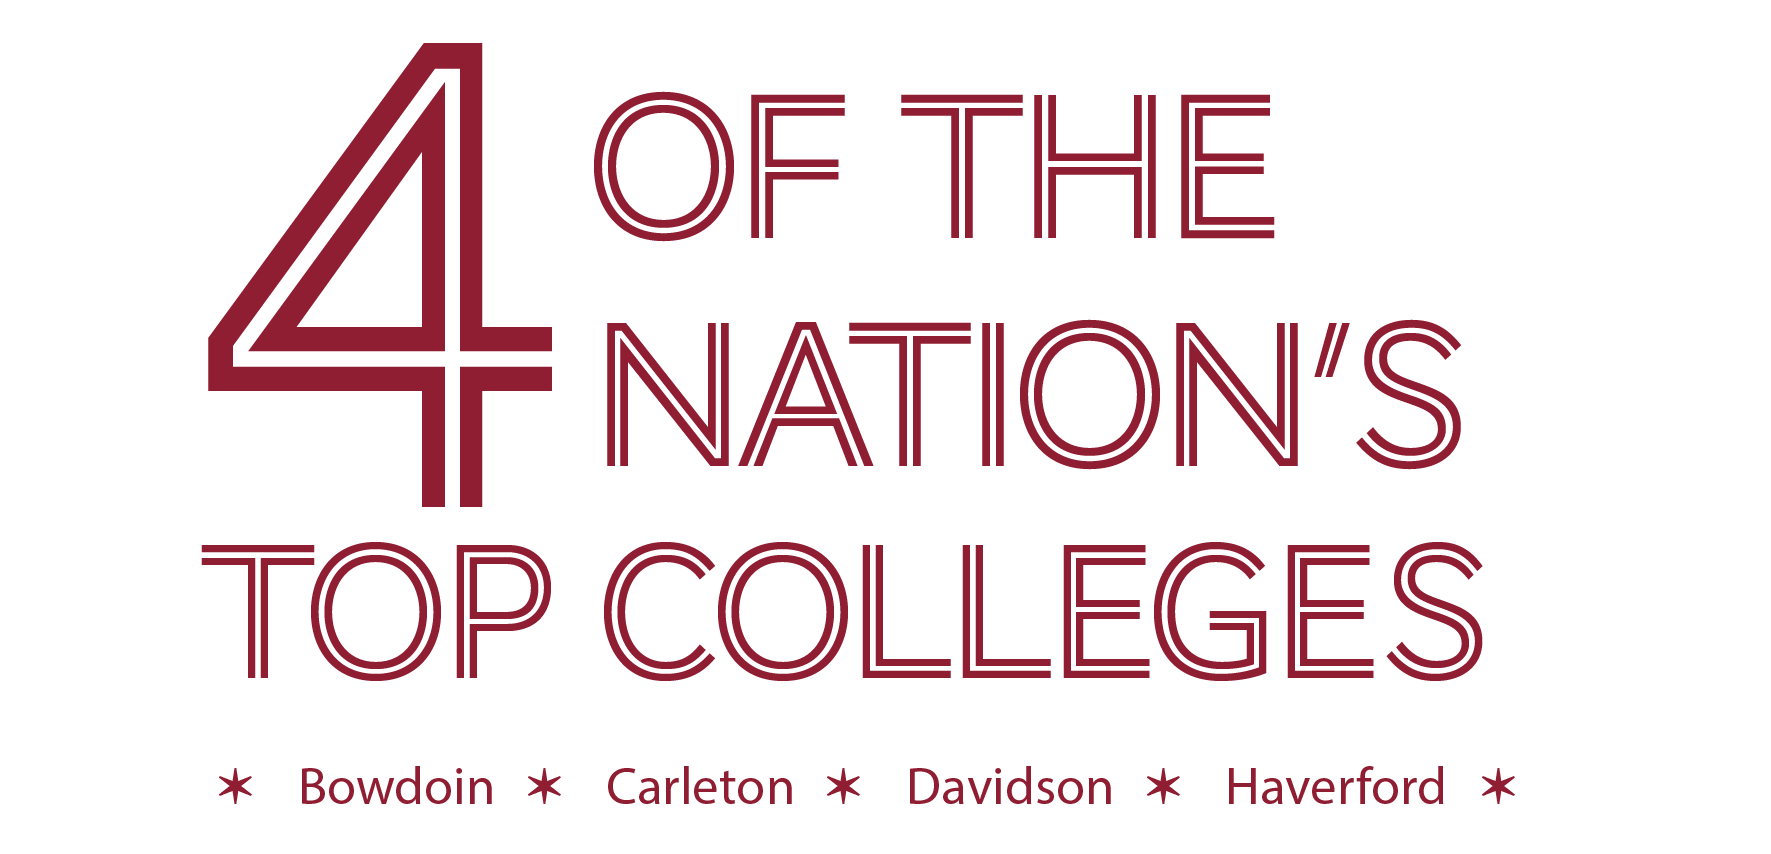 4 of the Nation’s Top Colleges